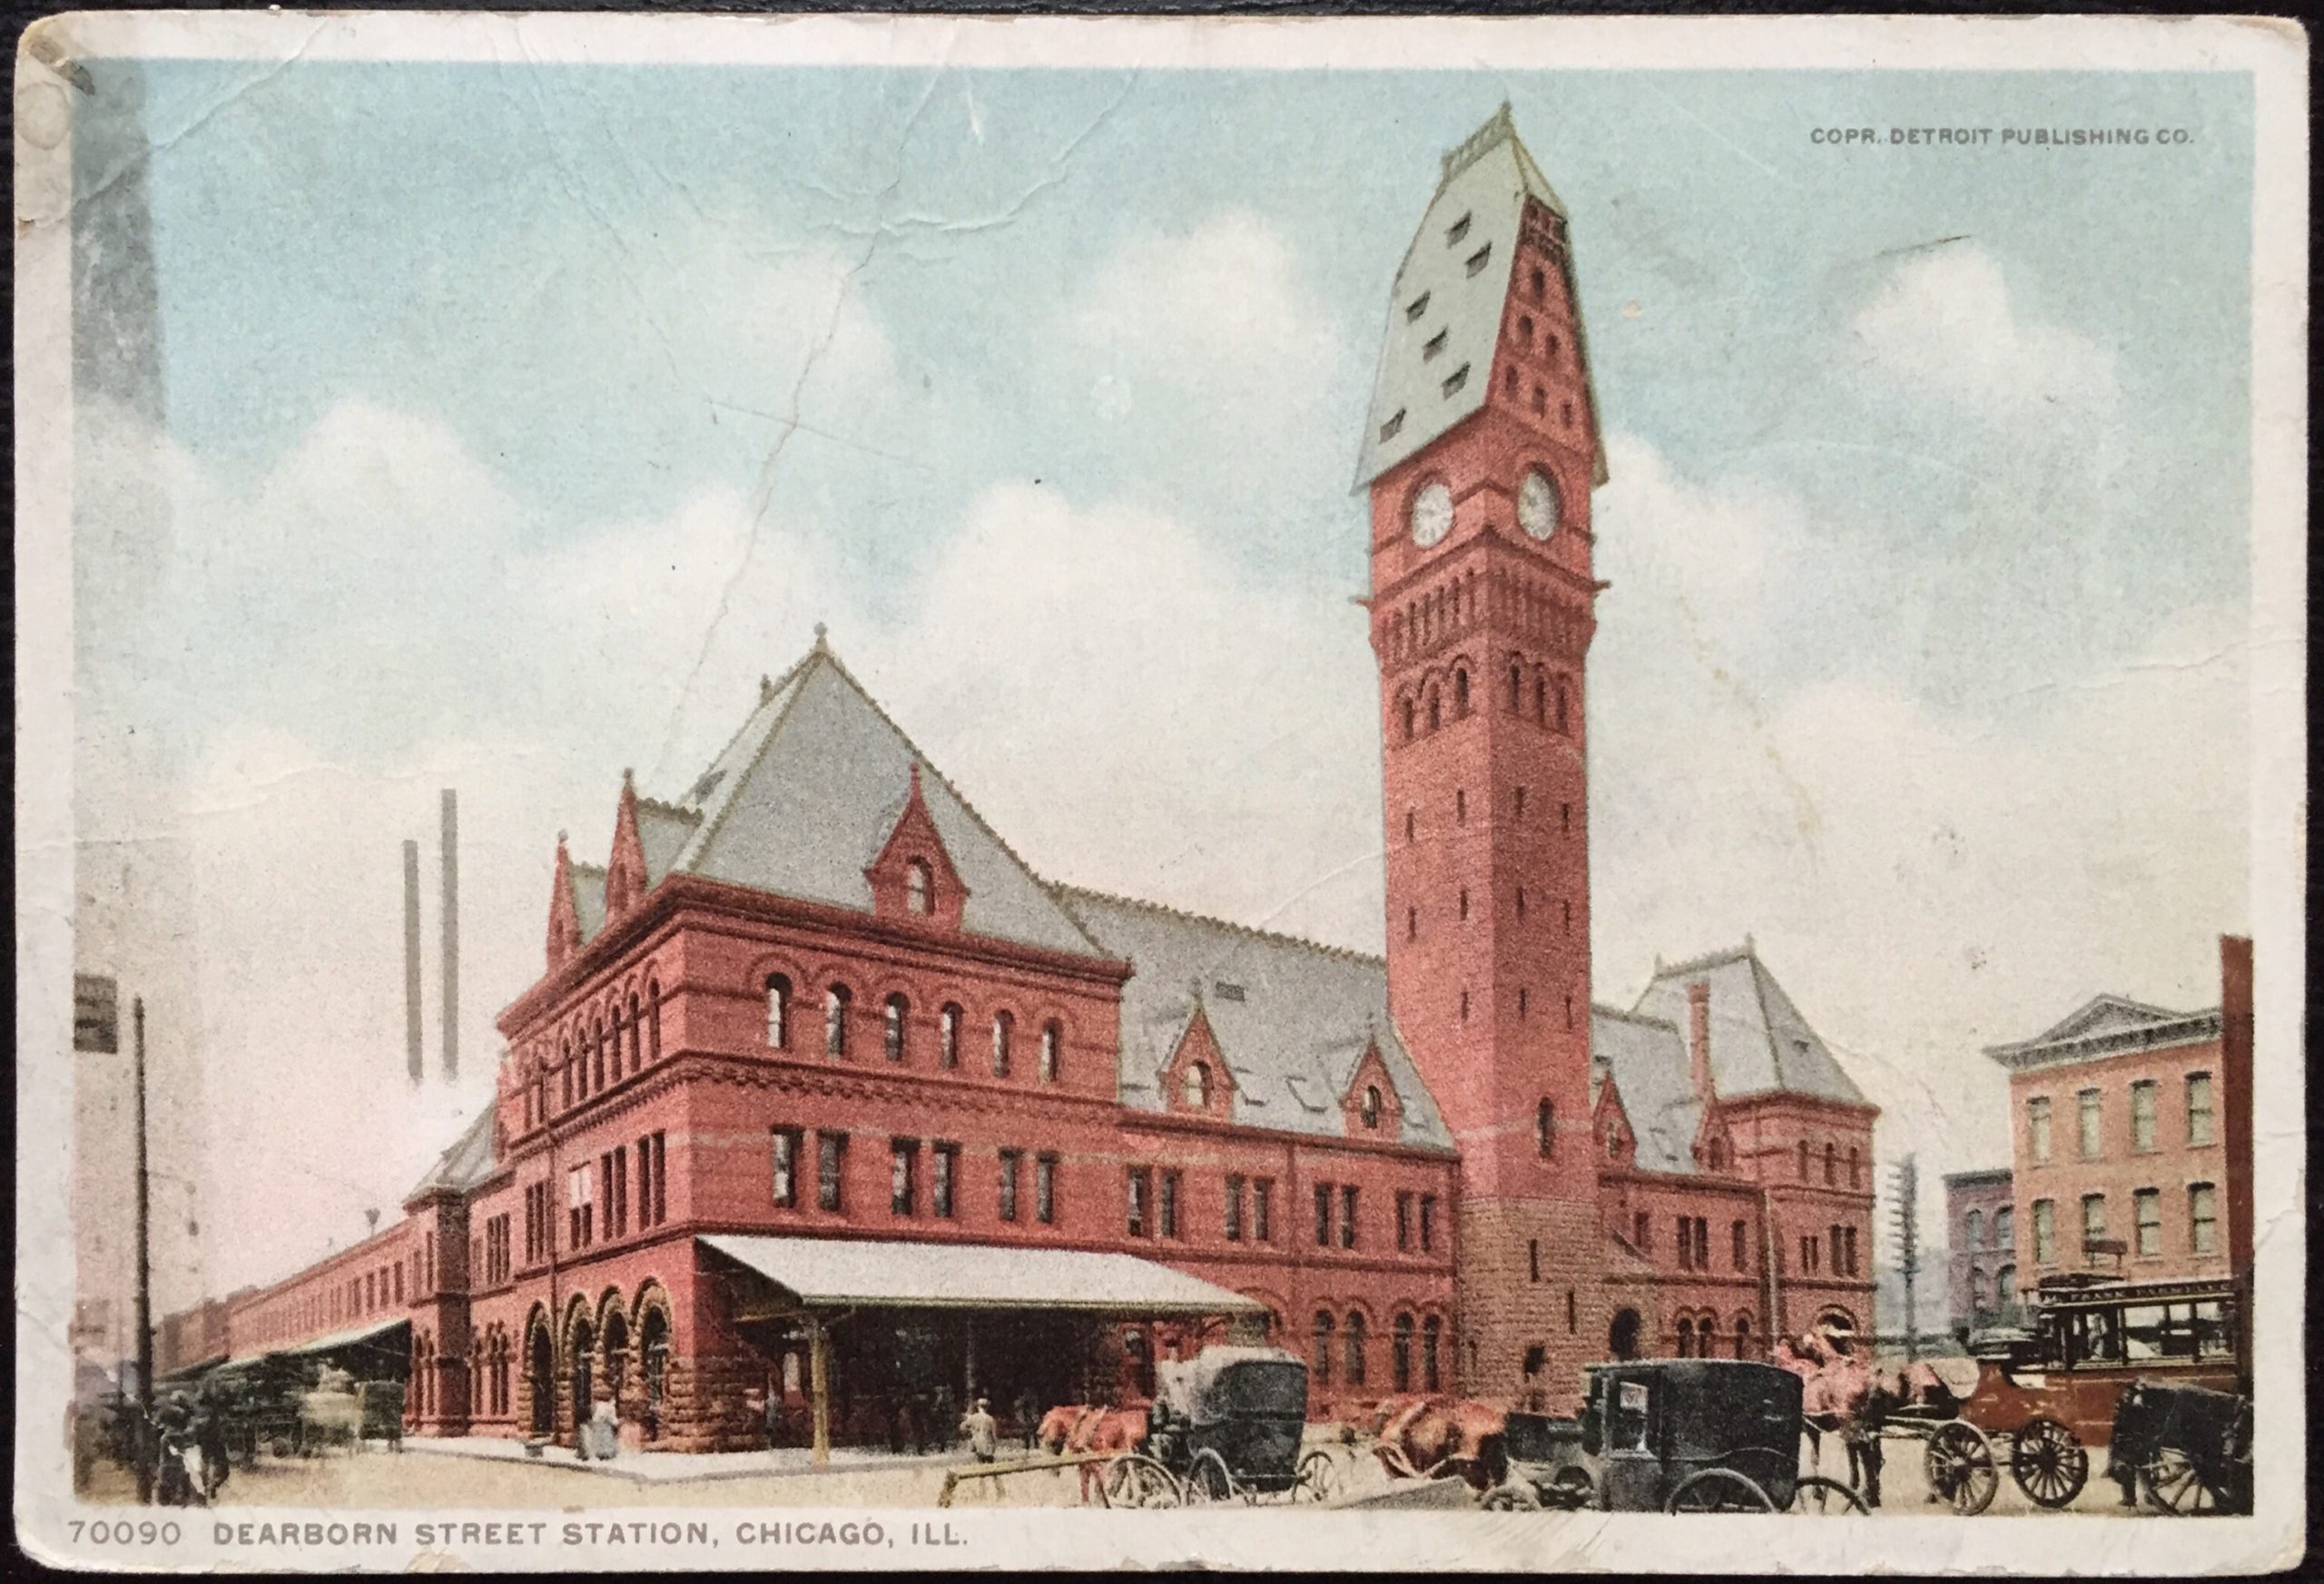 Dearborn Station as seen in 1906. Postcard illustration by Detroit Publishing Co